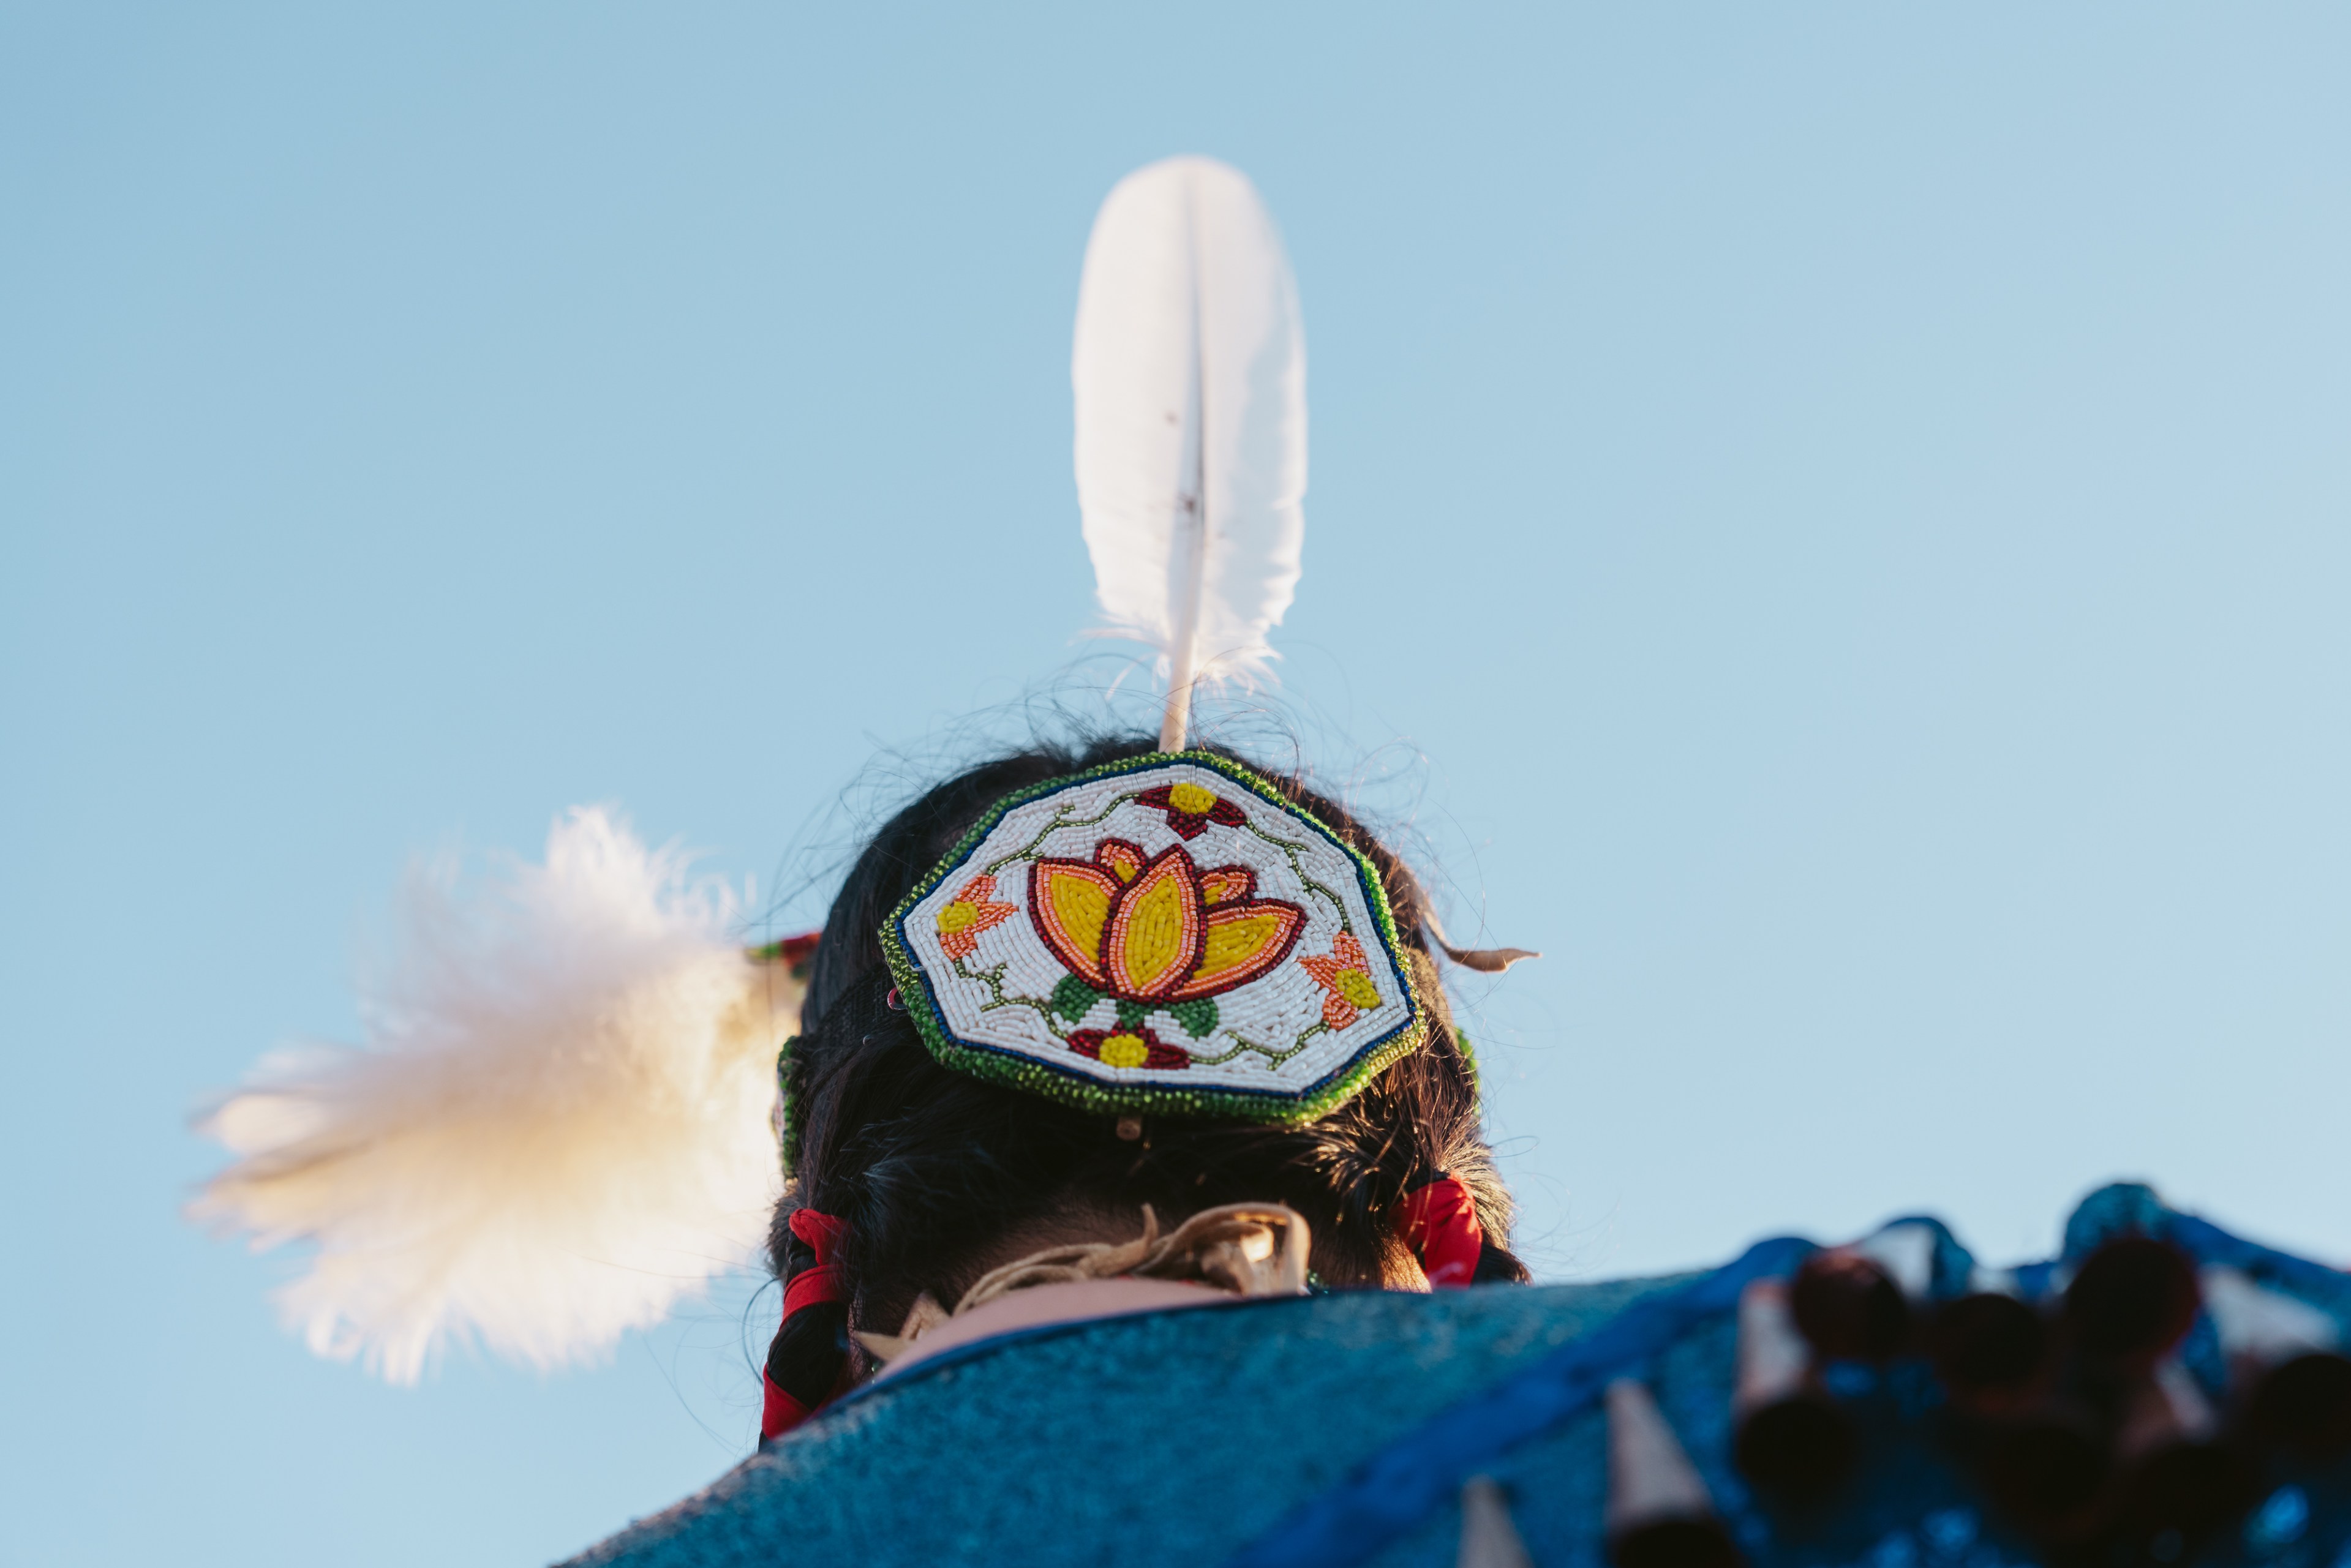 An image of a person's head adorned by a beaded headdress with white feathers.